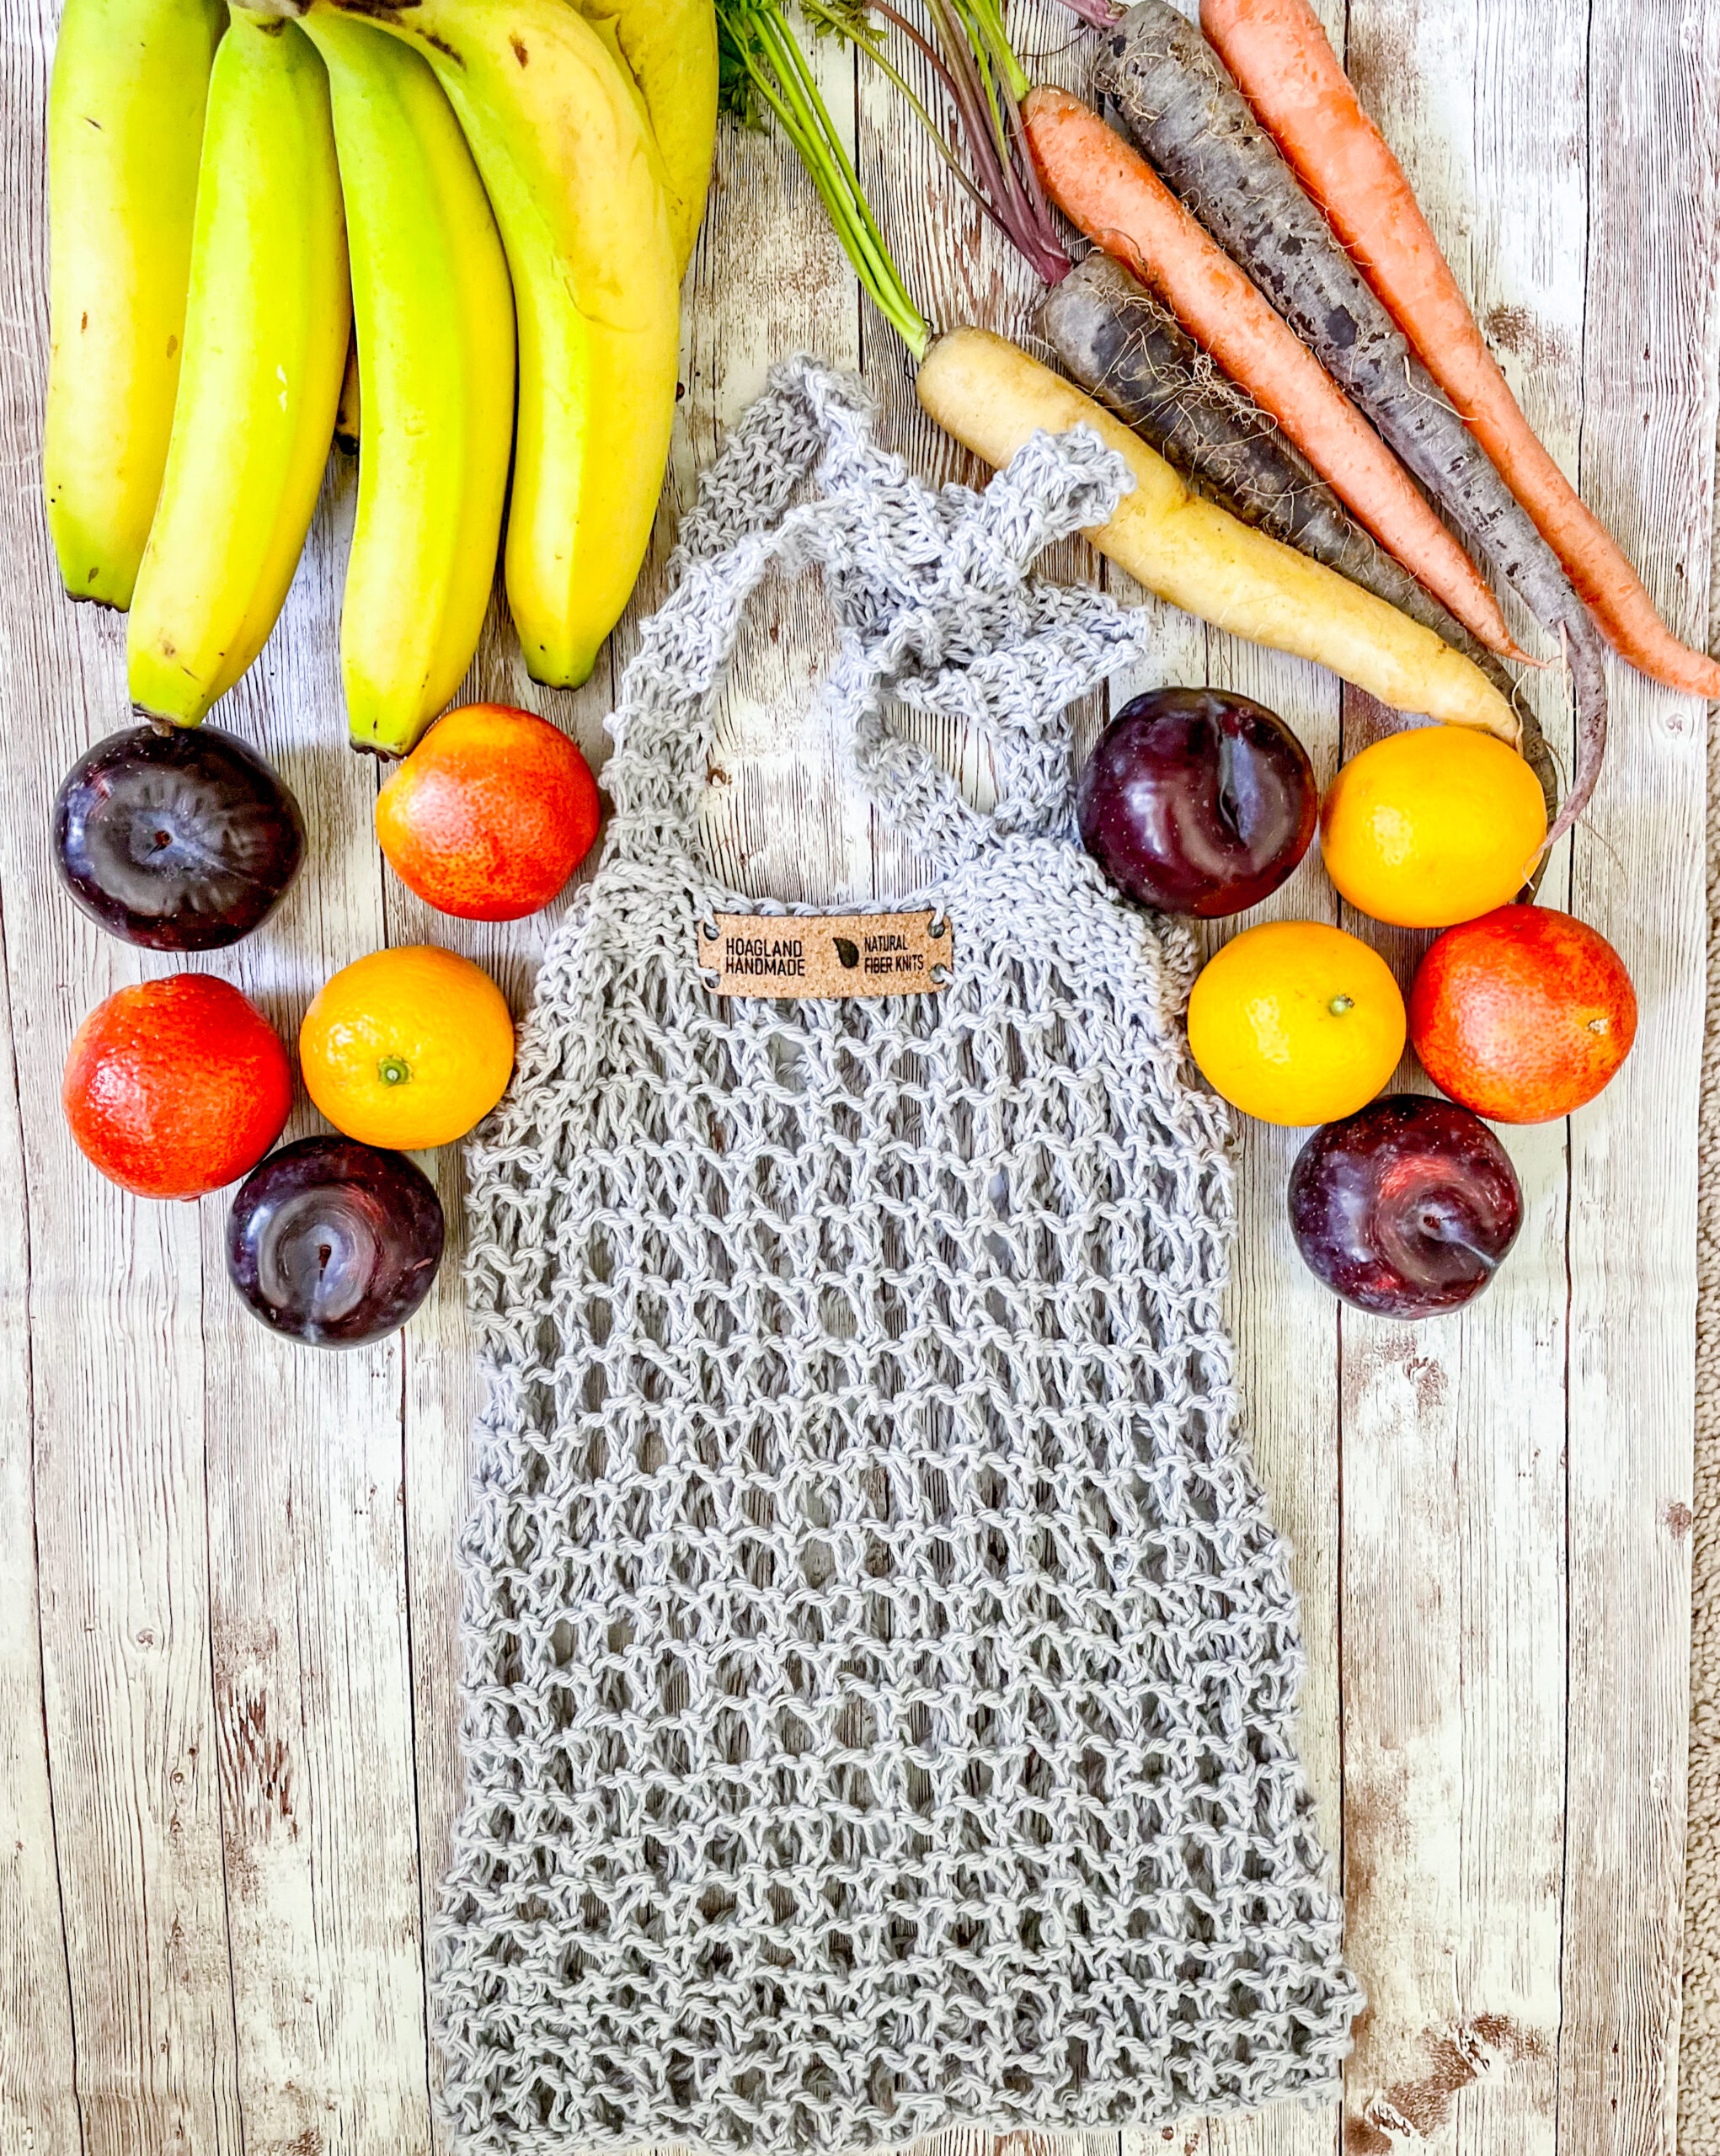 A gray recycled cotton mesh tote bag is surrounded by bananas, rainbow carrots, plums, oranges, and blood oranges